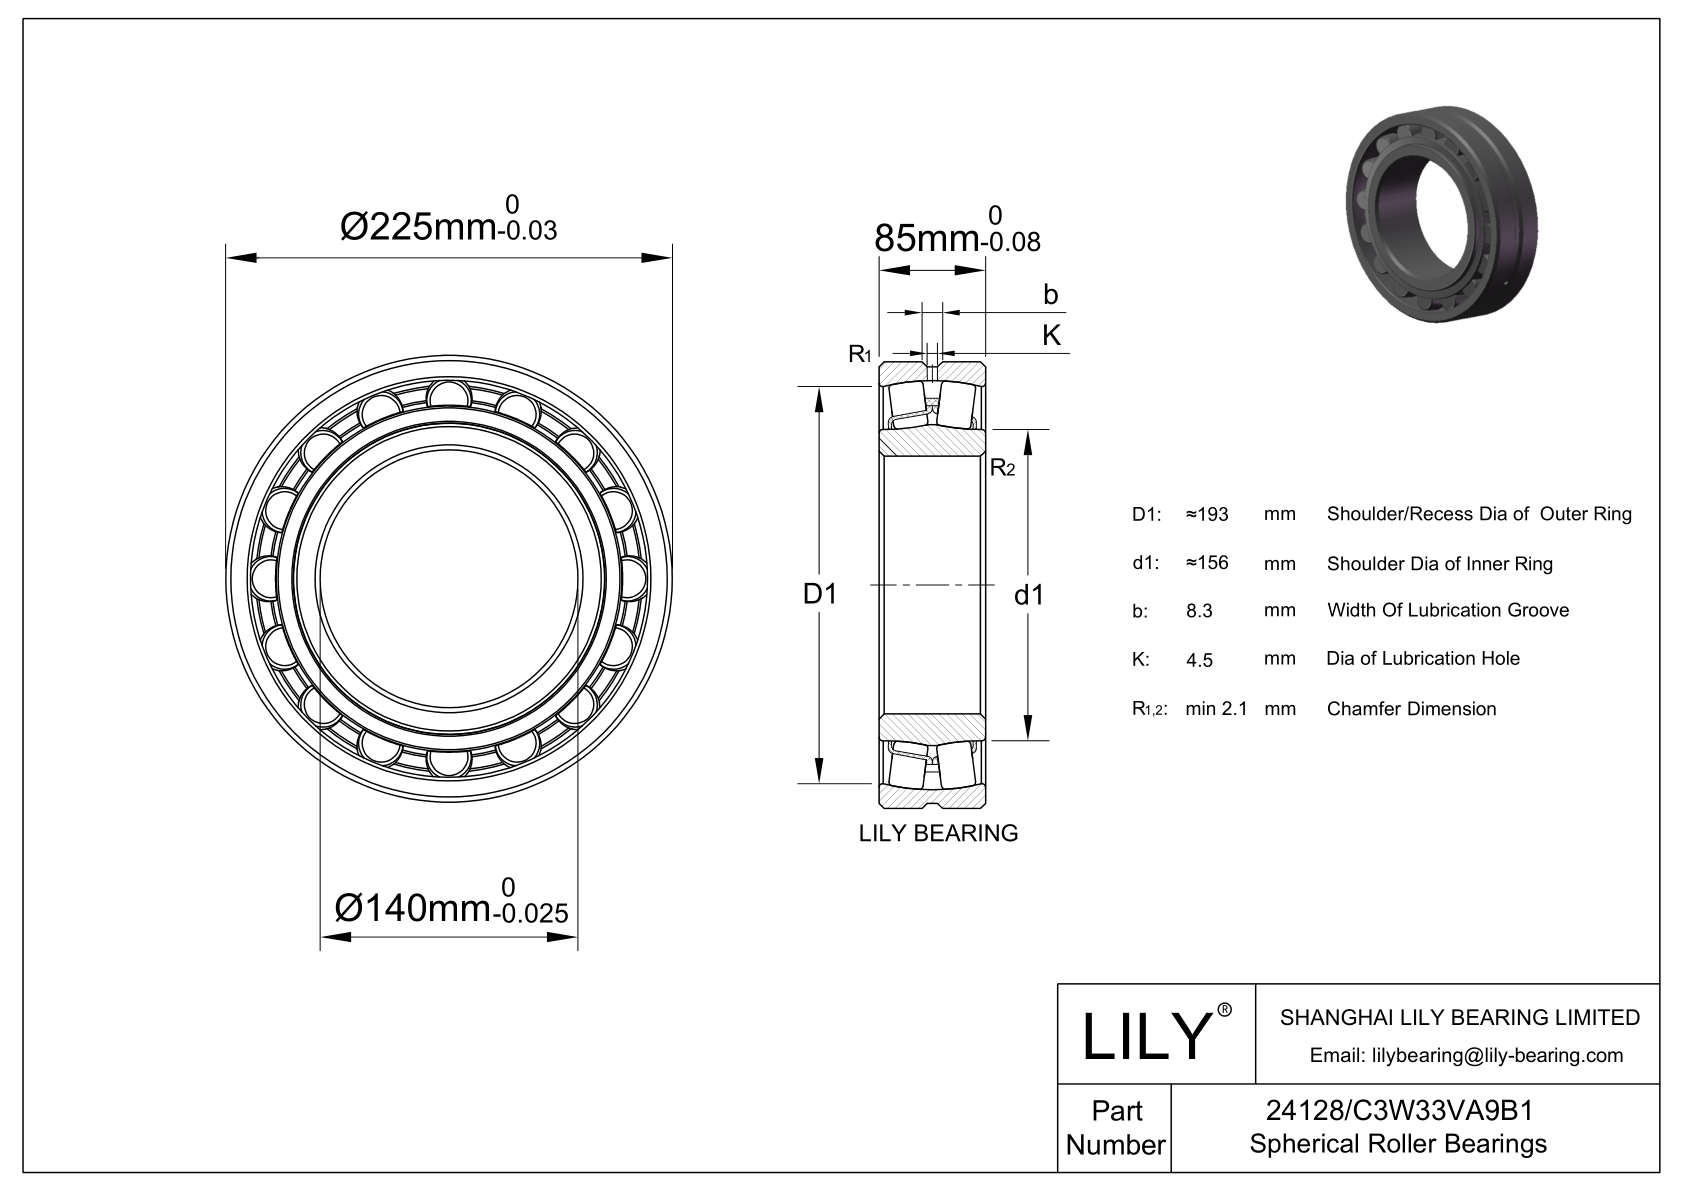 24128/C3W33VA9B1 Double Row Spherical Roller Bearing cad drawing